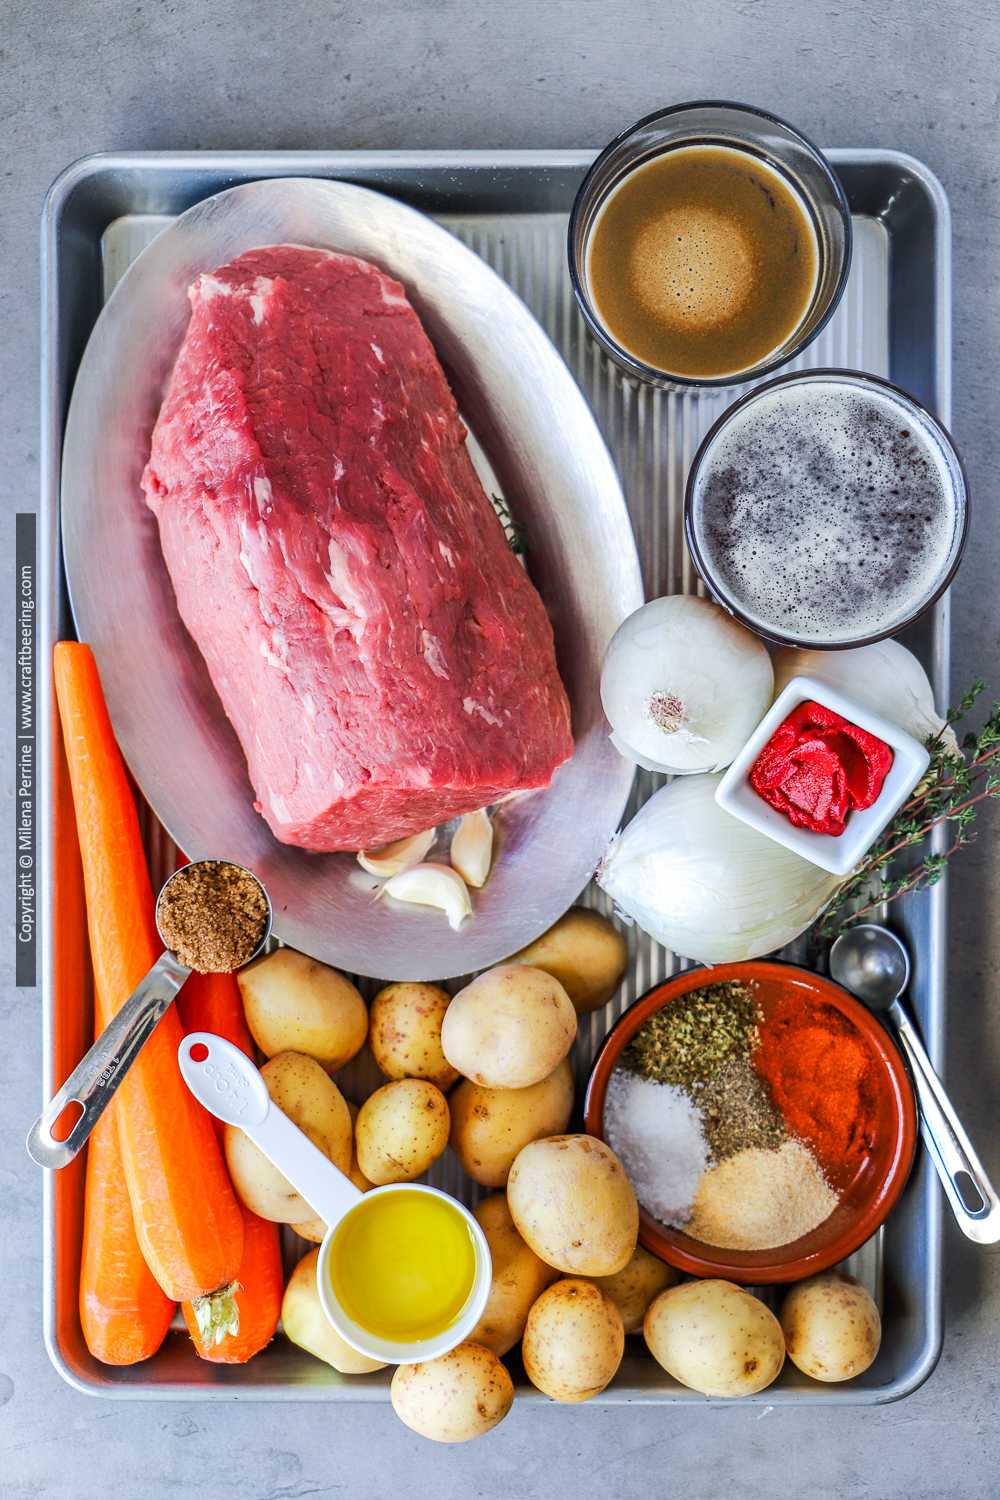 Raw eye of round with other ingredients for beef roast with vegetables.